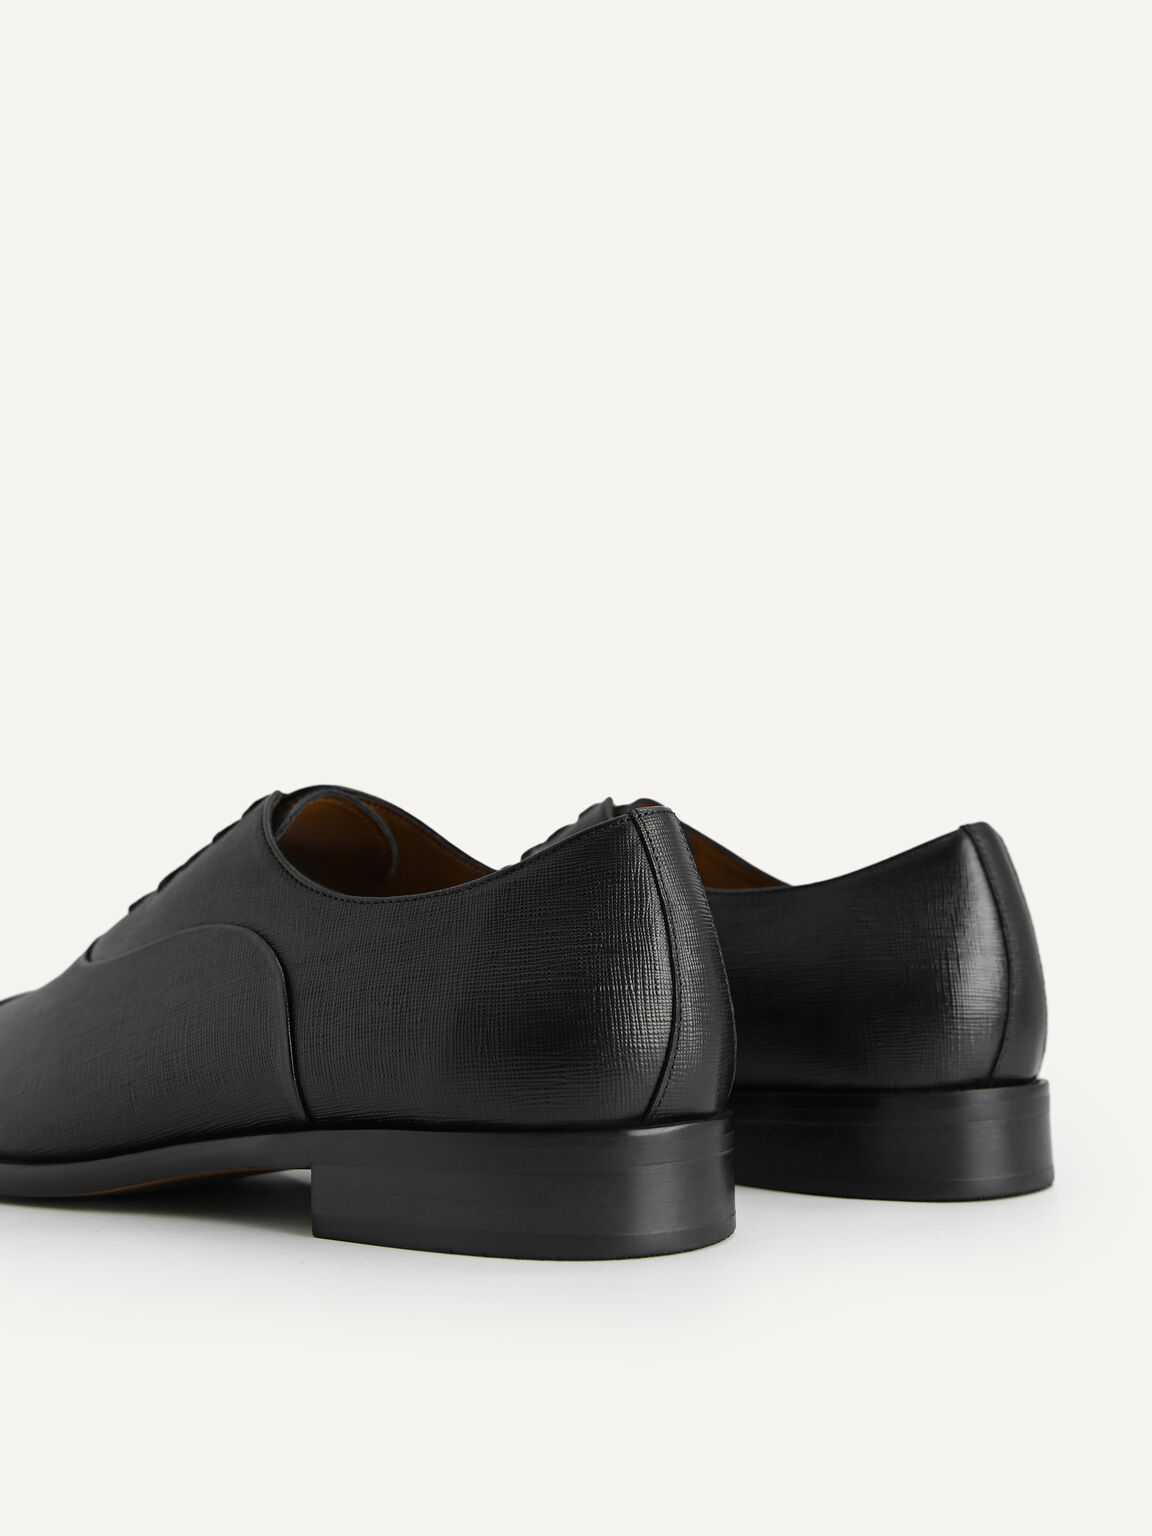 Textured Leather Oxford Shoes, Black